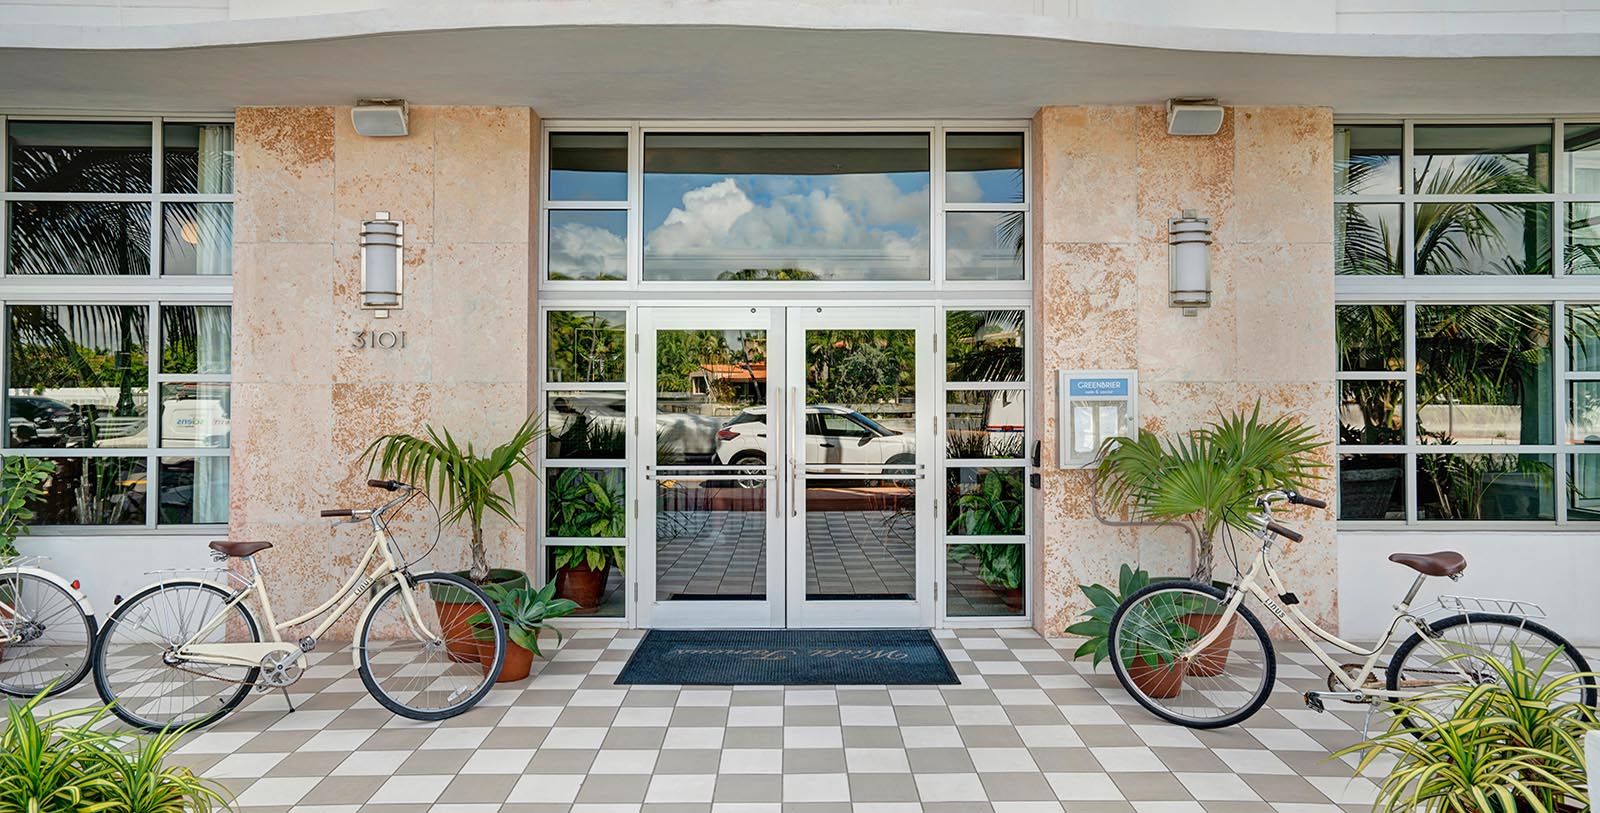 Experience the ocean breezes while cruising on one of the house bicycles down to the beach.